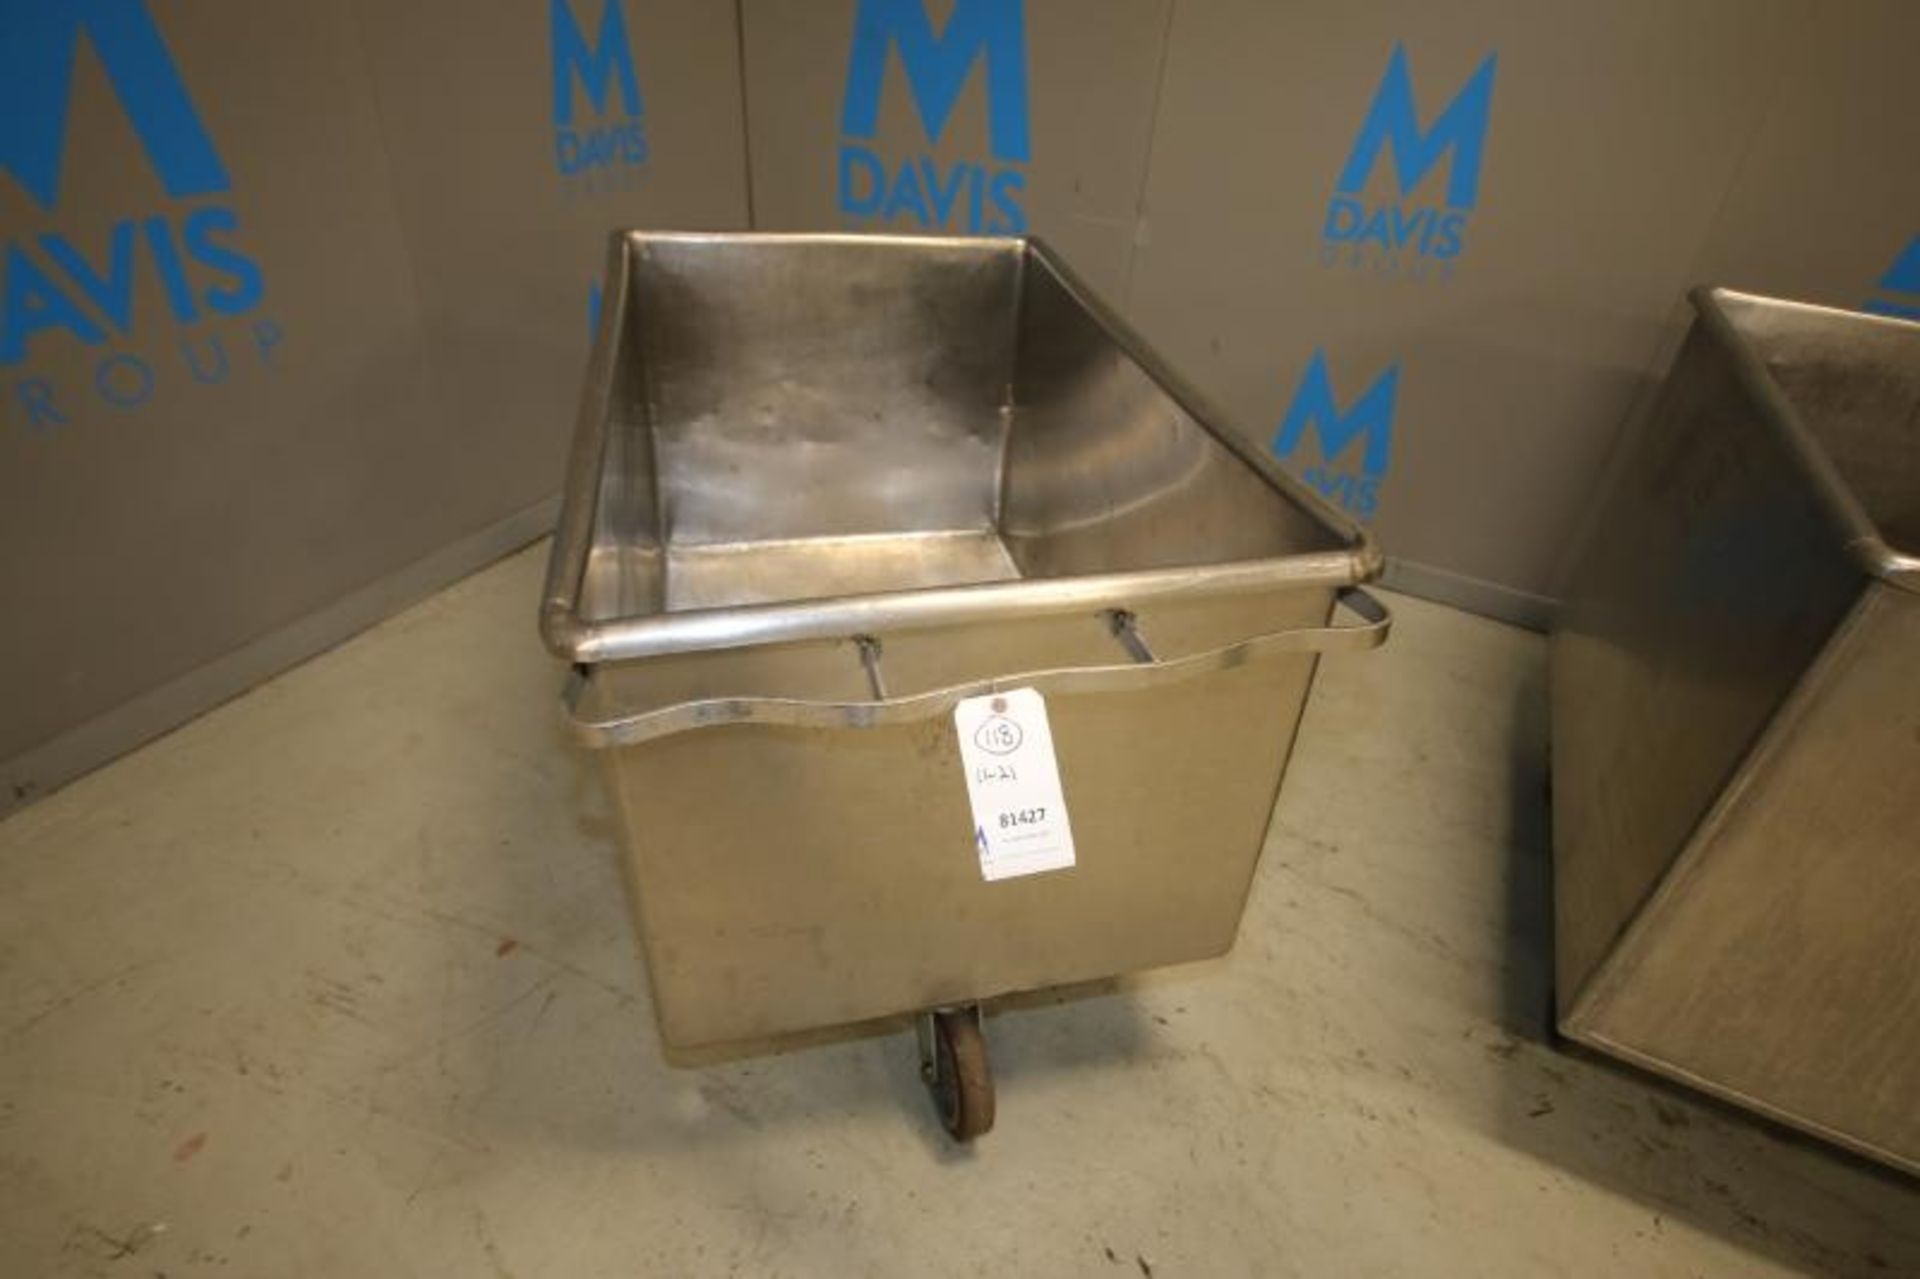 49" L x 29" W x 25" D Portable S/S Tote(INV#81427)(Located @ the MDG Auction Showroom in Pgh., PA)(